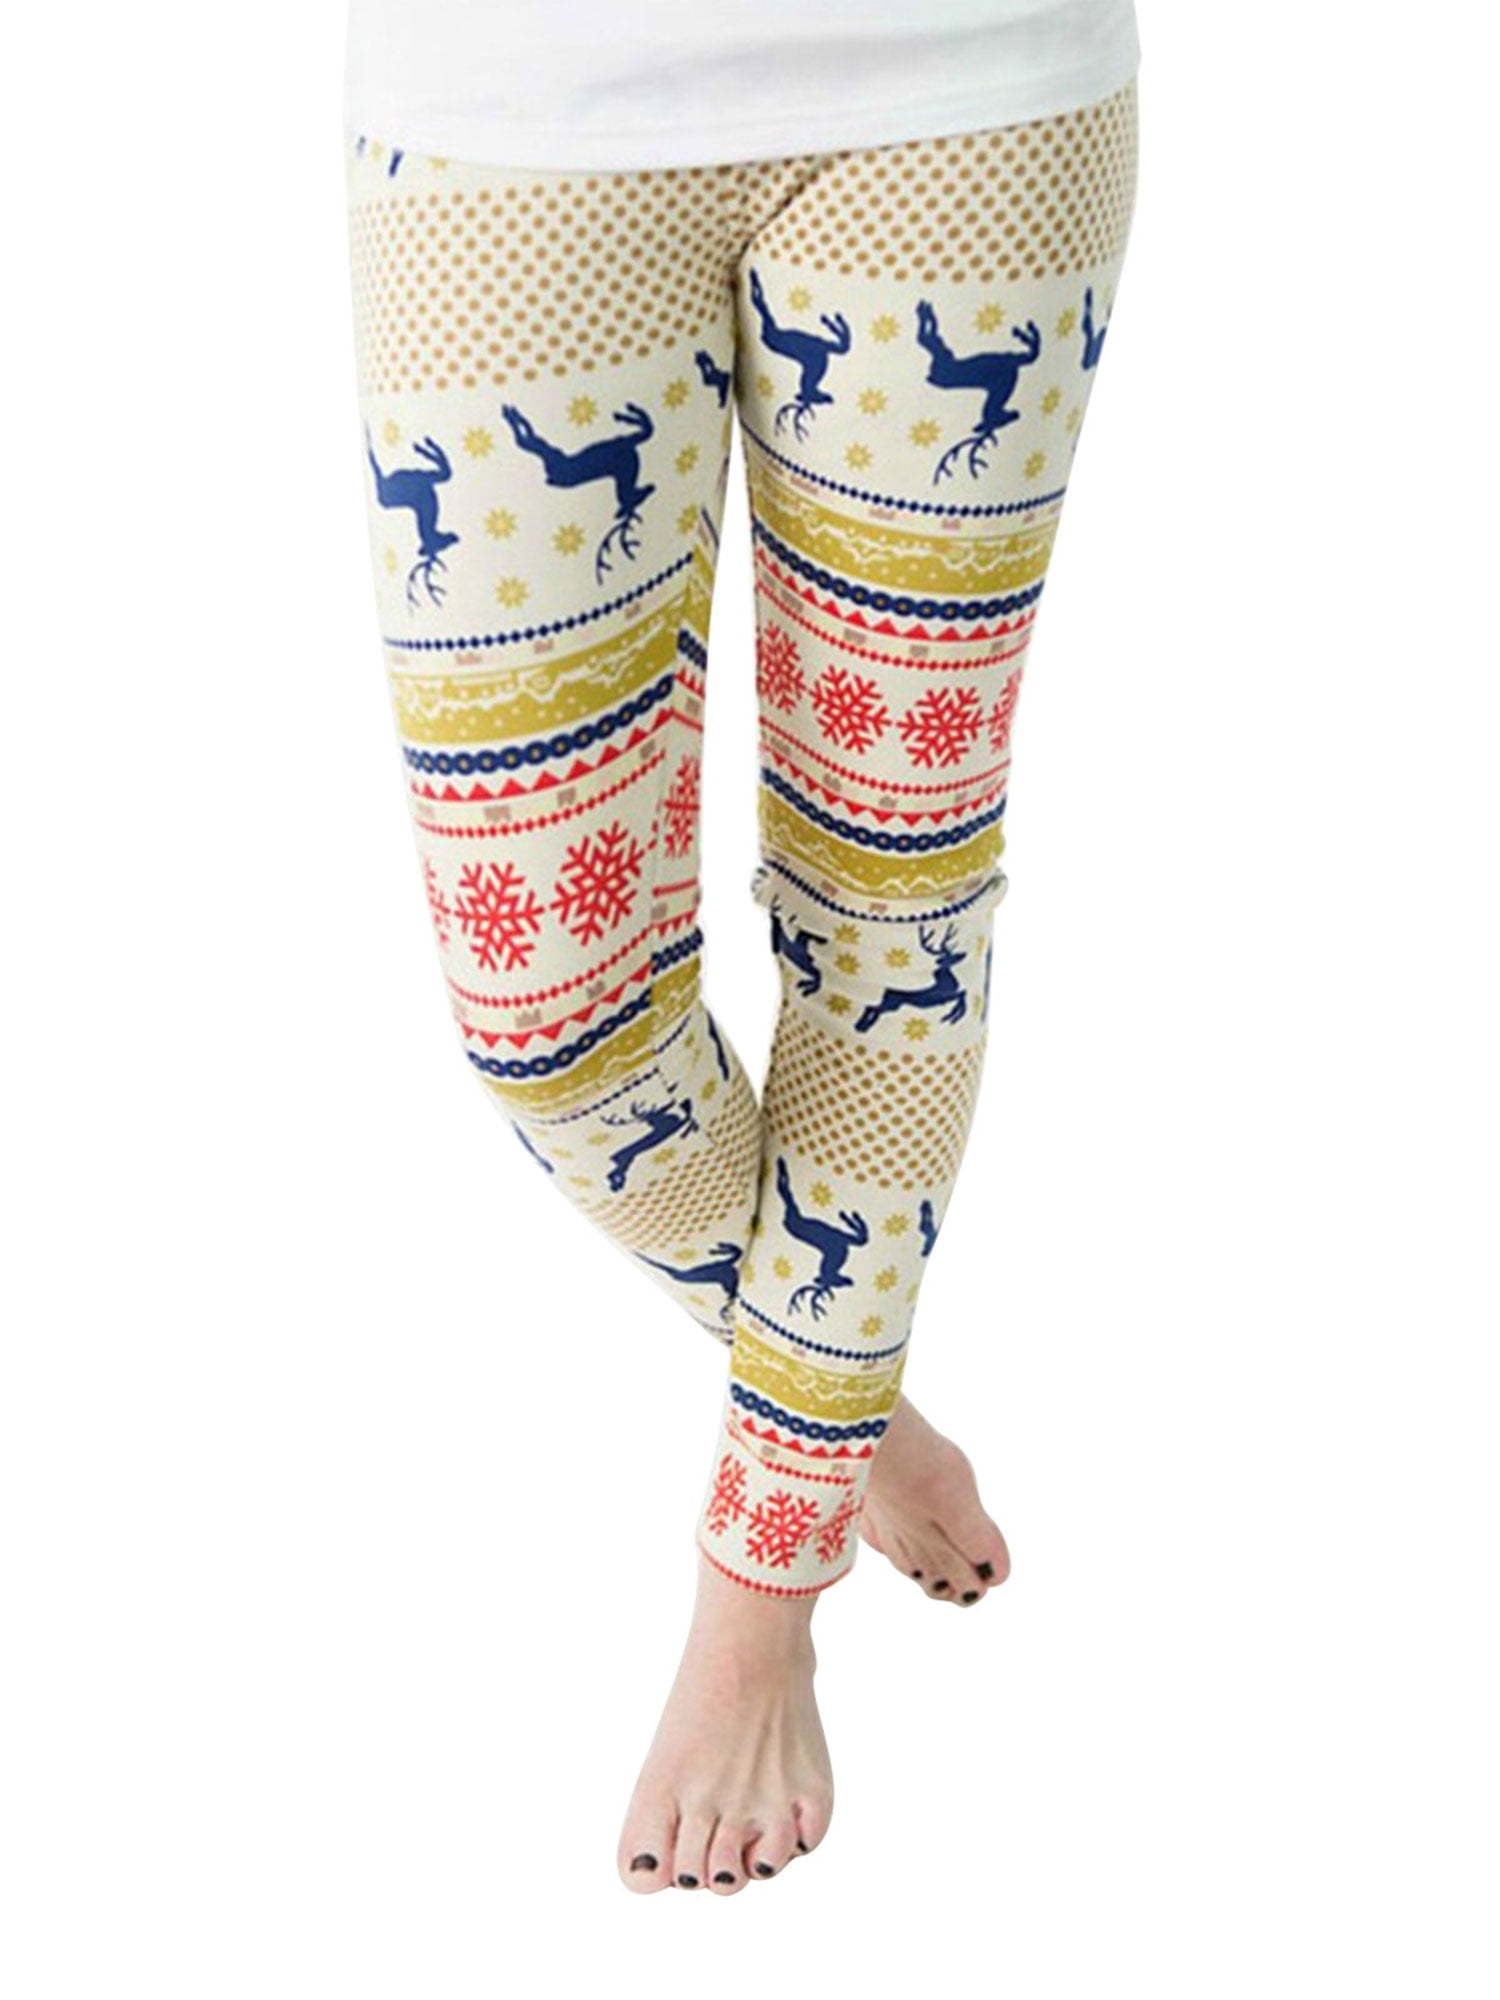 FLEECE LINED WOMEN'S LEGGINGS ASSORTED SIZES NWT REINDEER THEME FREE SHIPPING